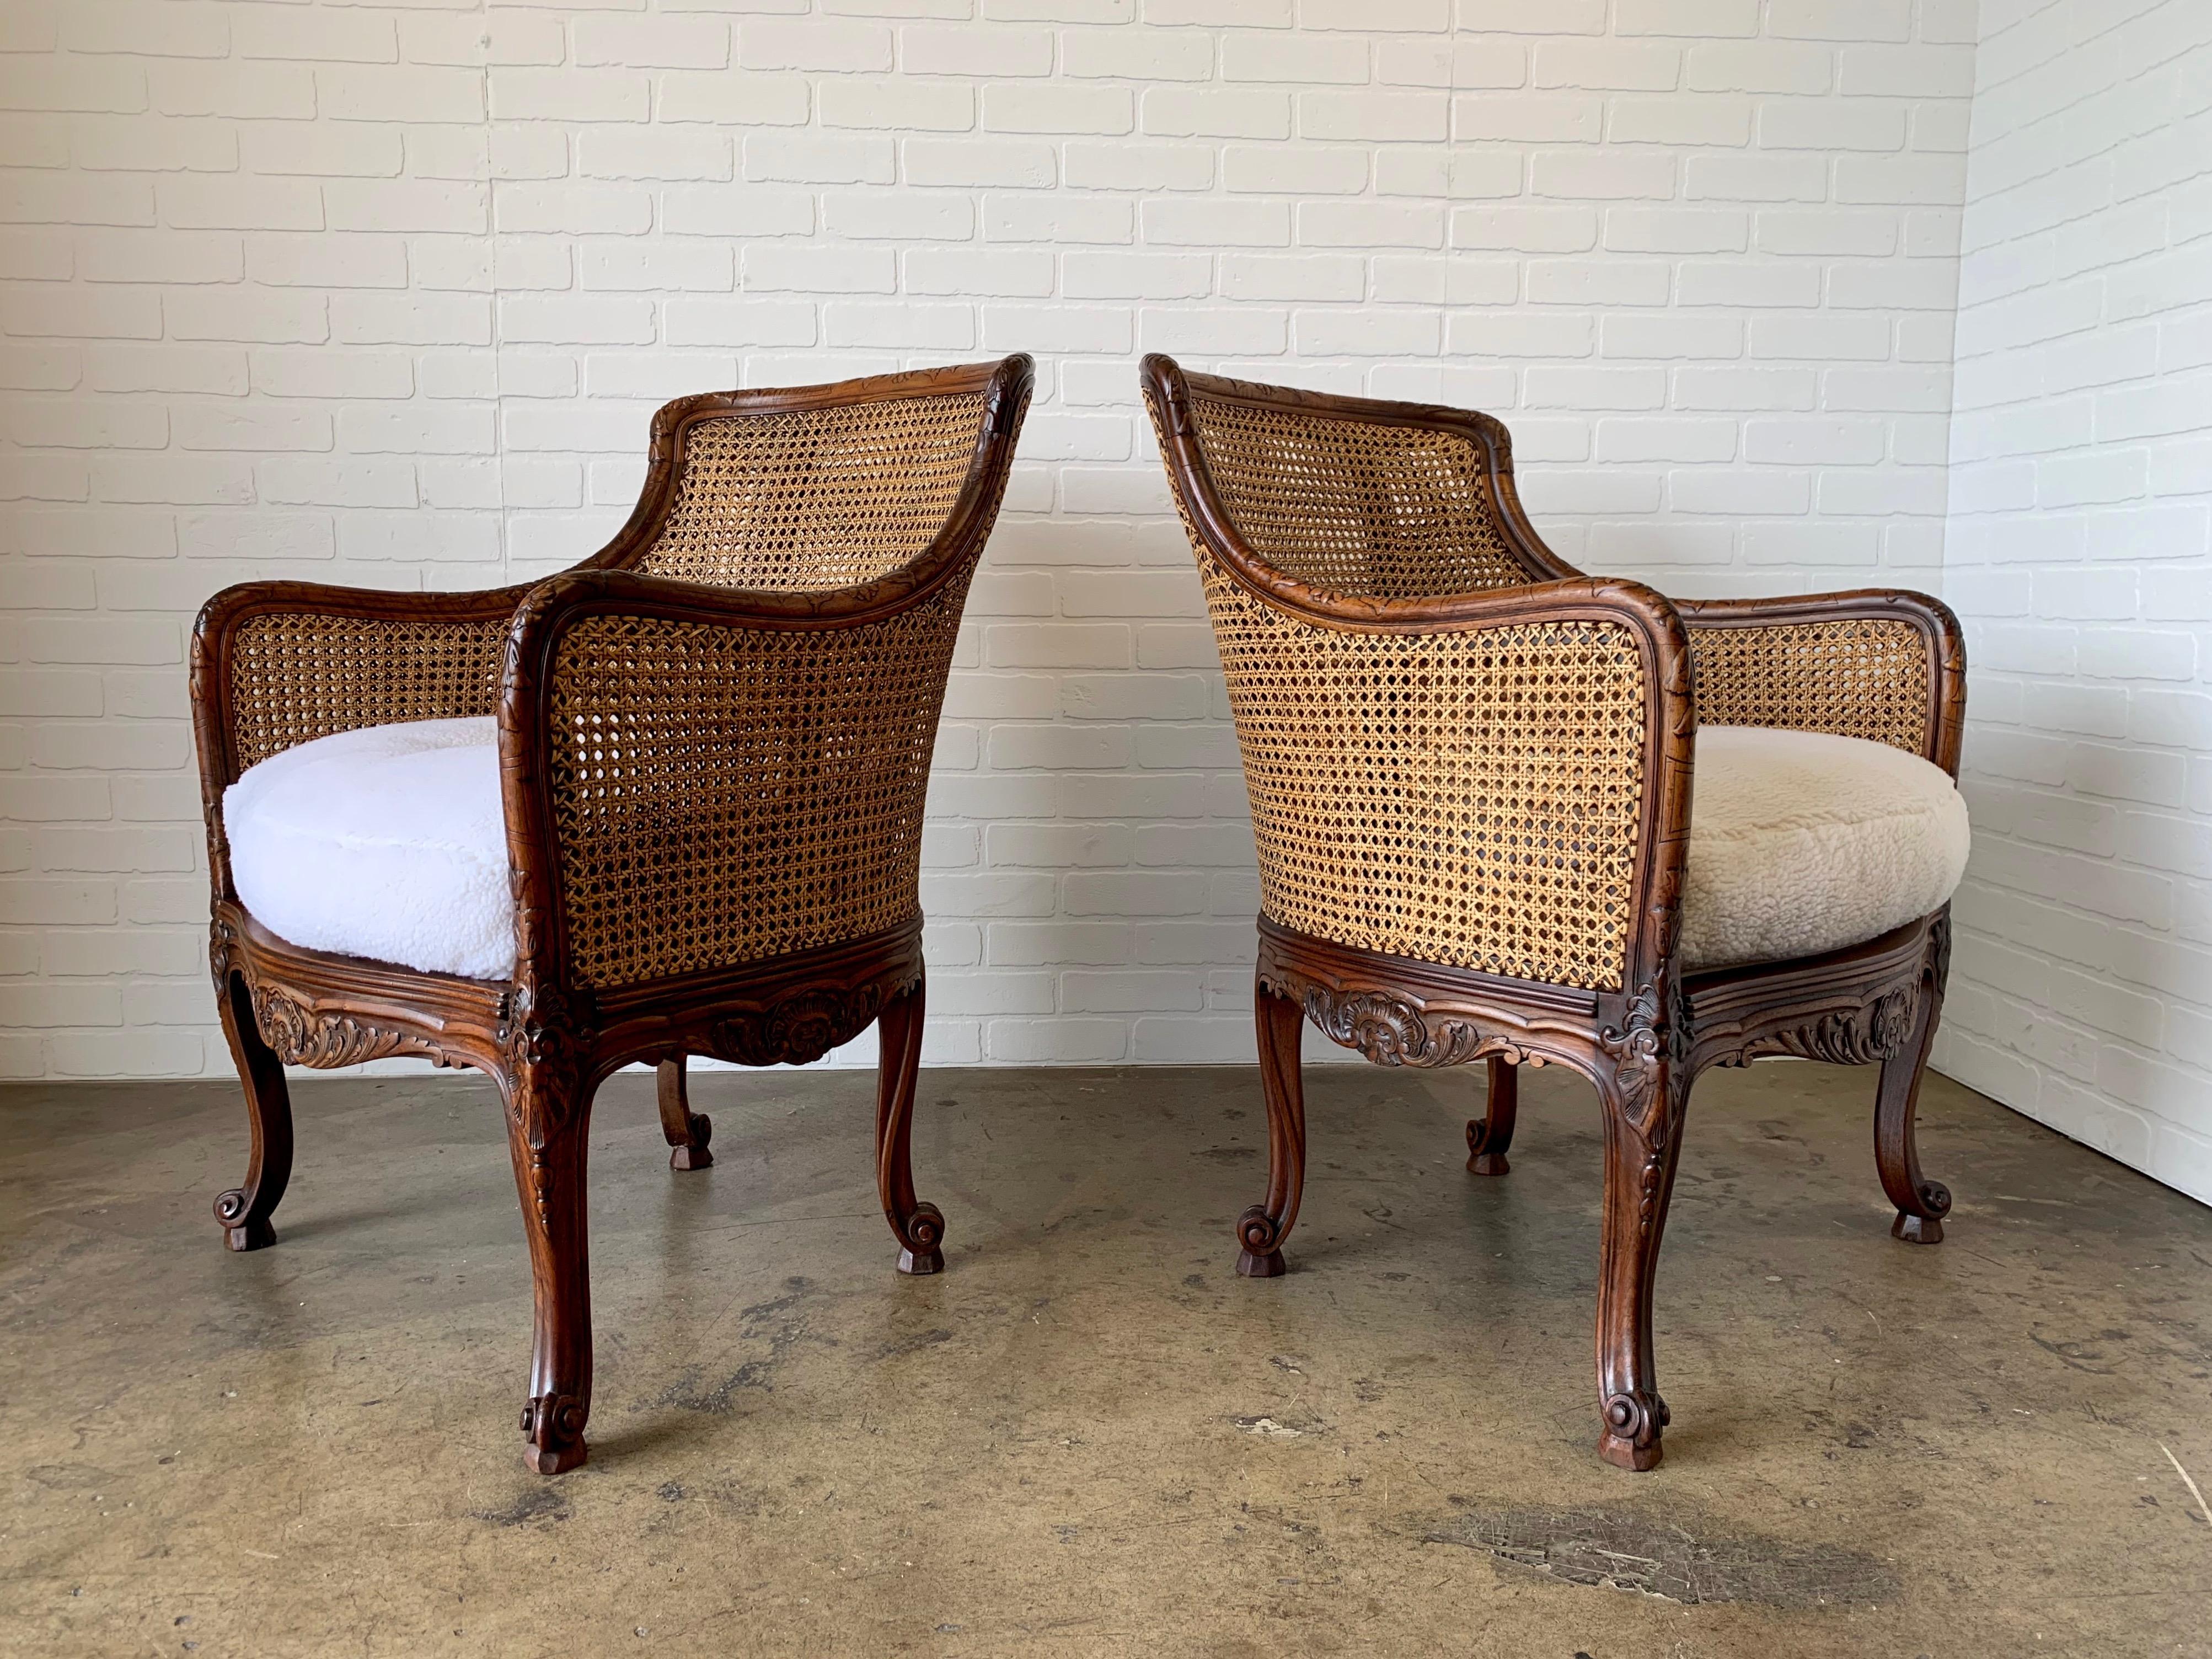 Solid walnut frames with double cane back and sides. The seats are re upholstered in faux fur.